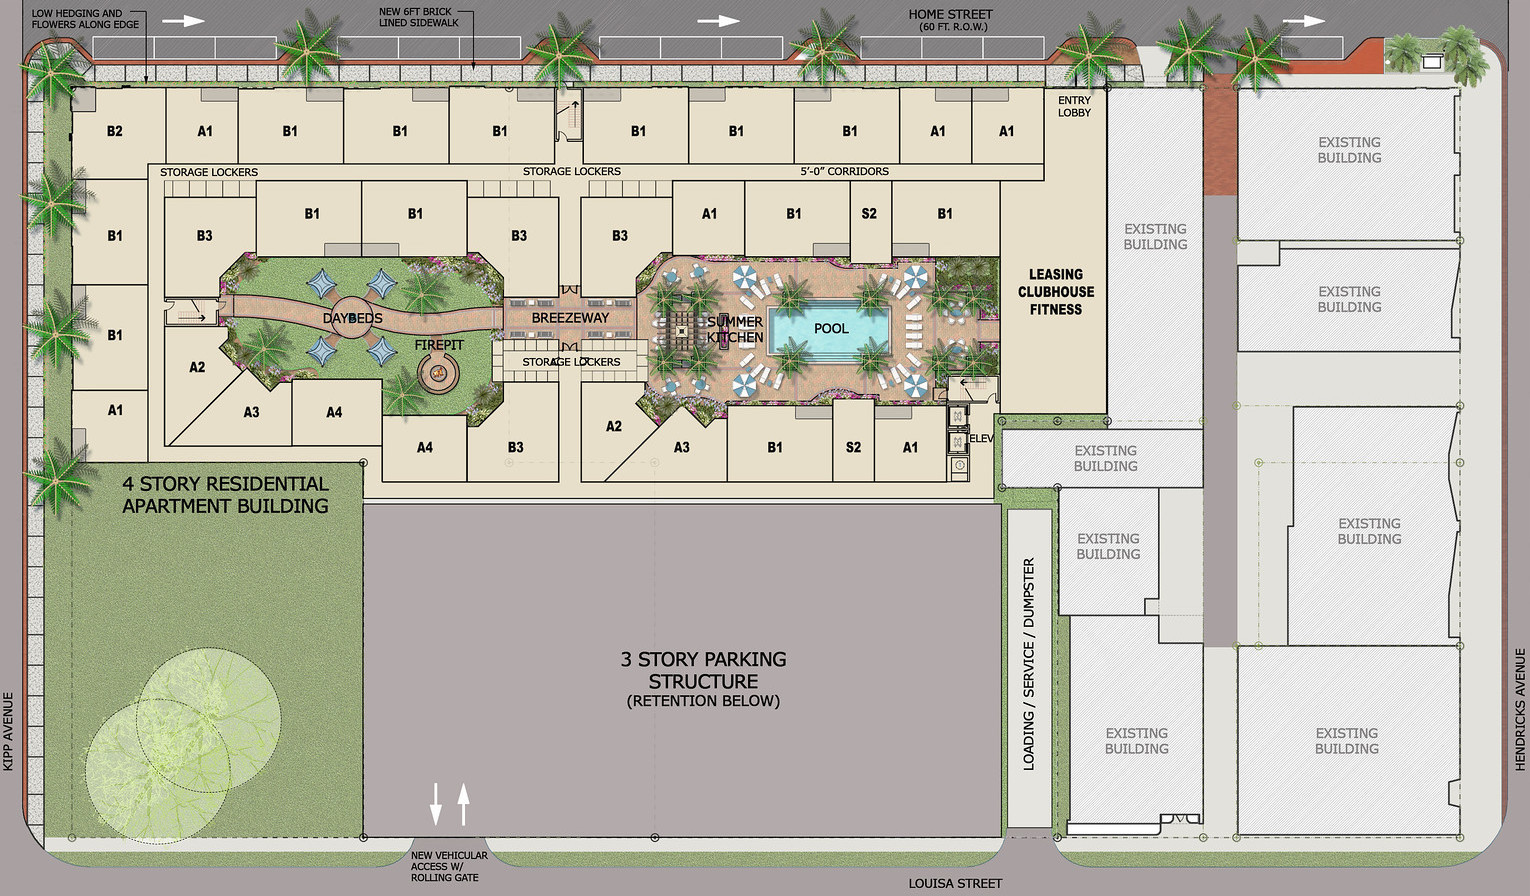 The site plan for Home Street Apartments.